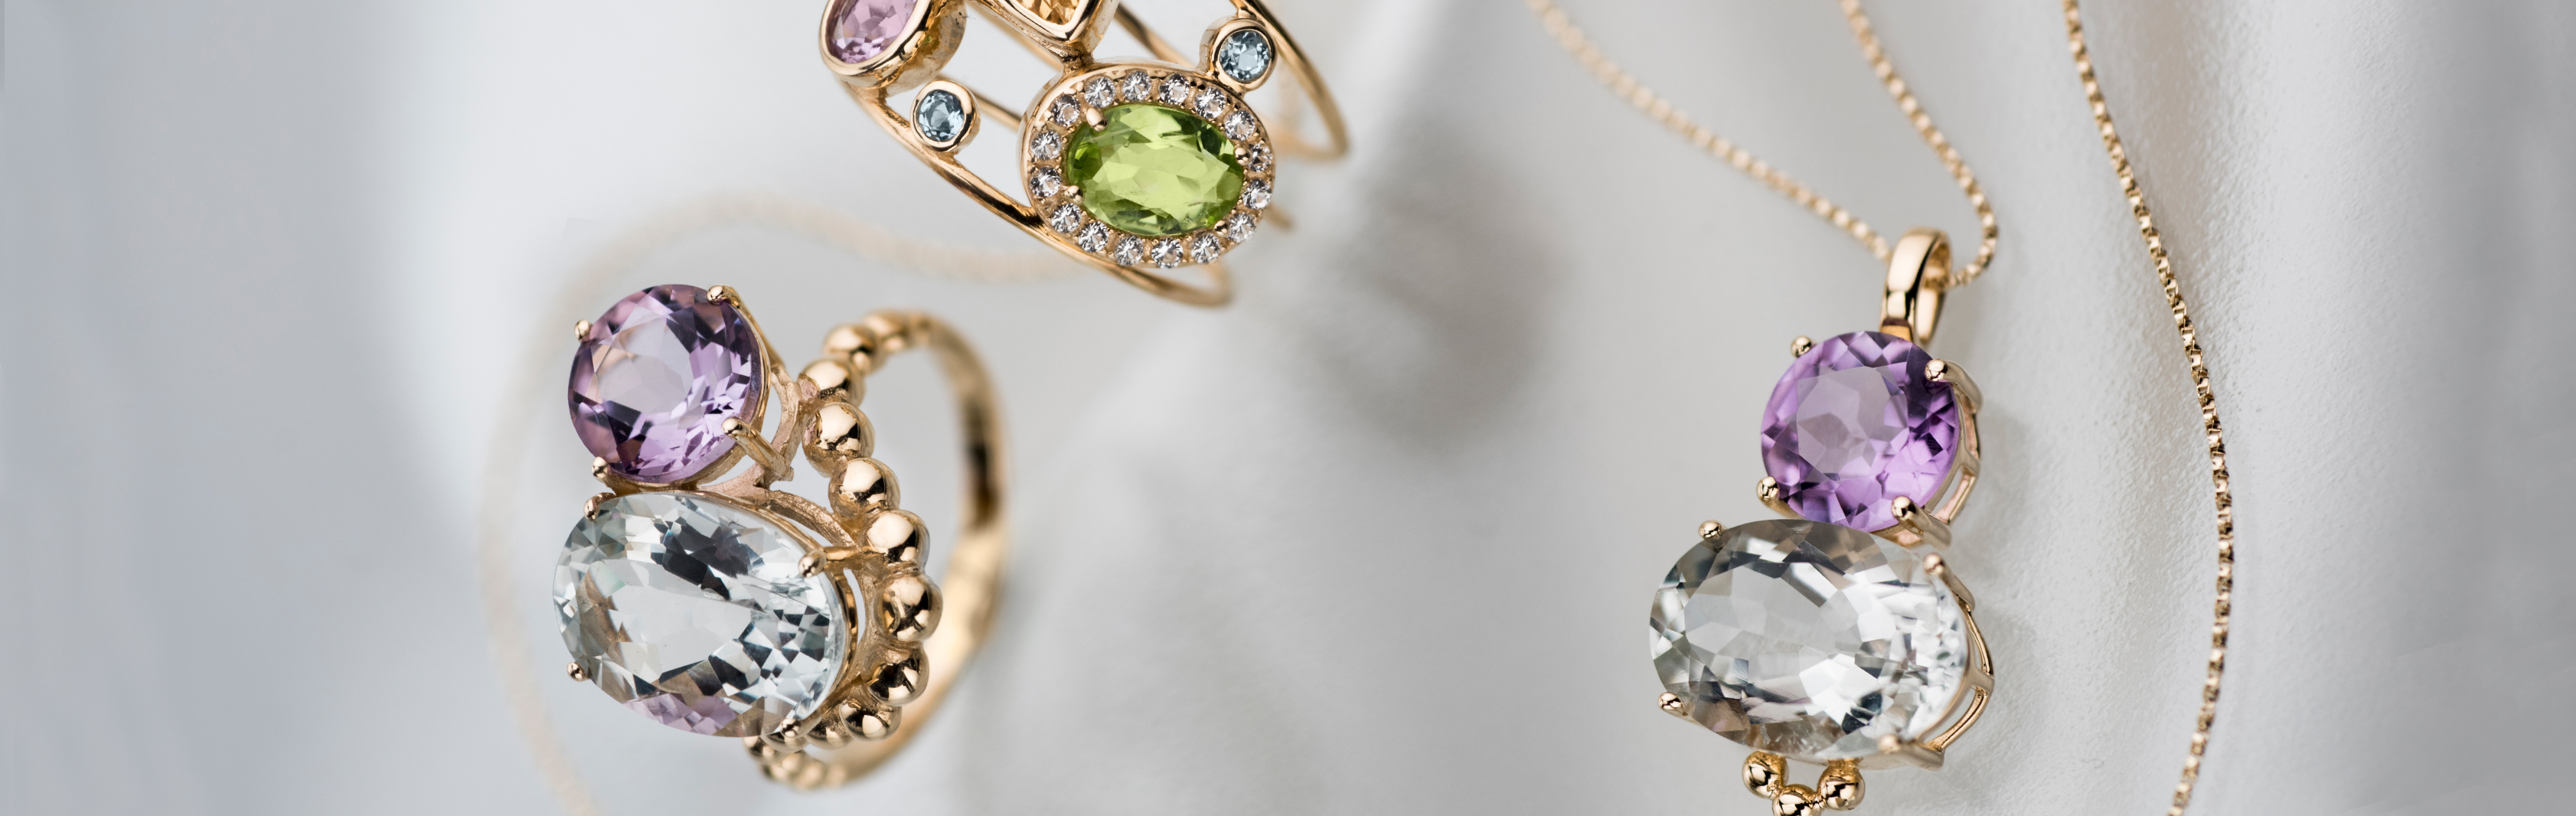 Rainbow Collection | 14K Gold Jewelry with Blue Topaz, Citrine, Amethyst and Peridot